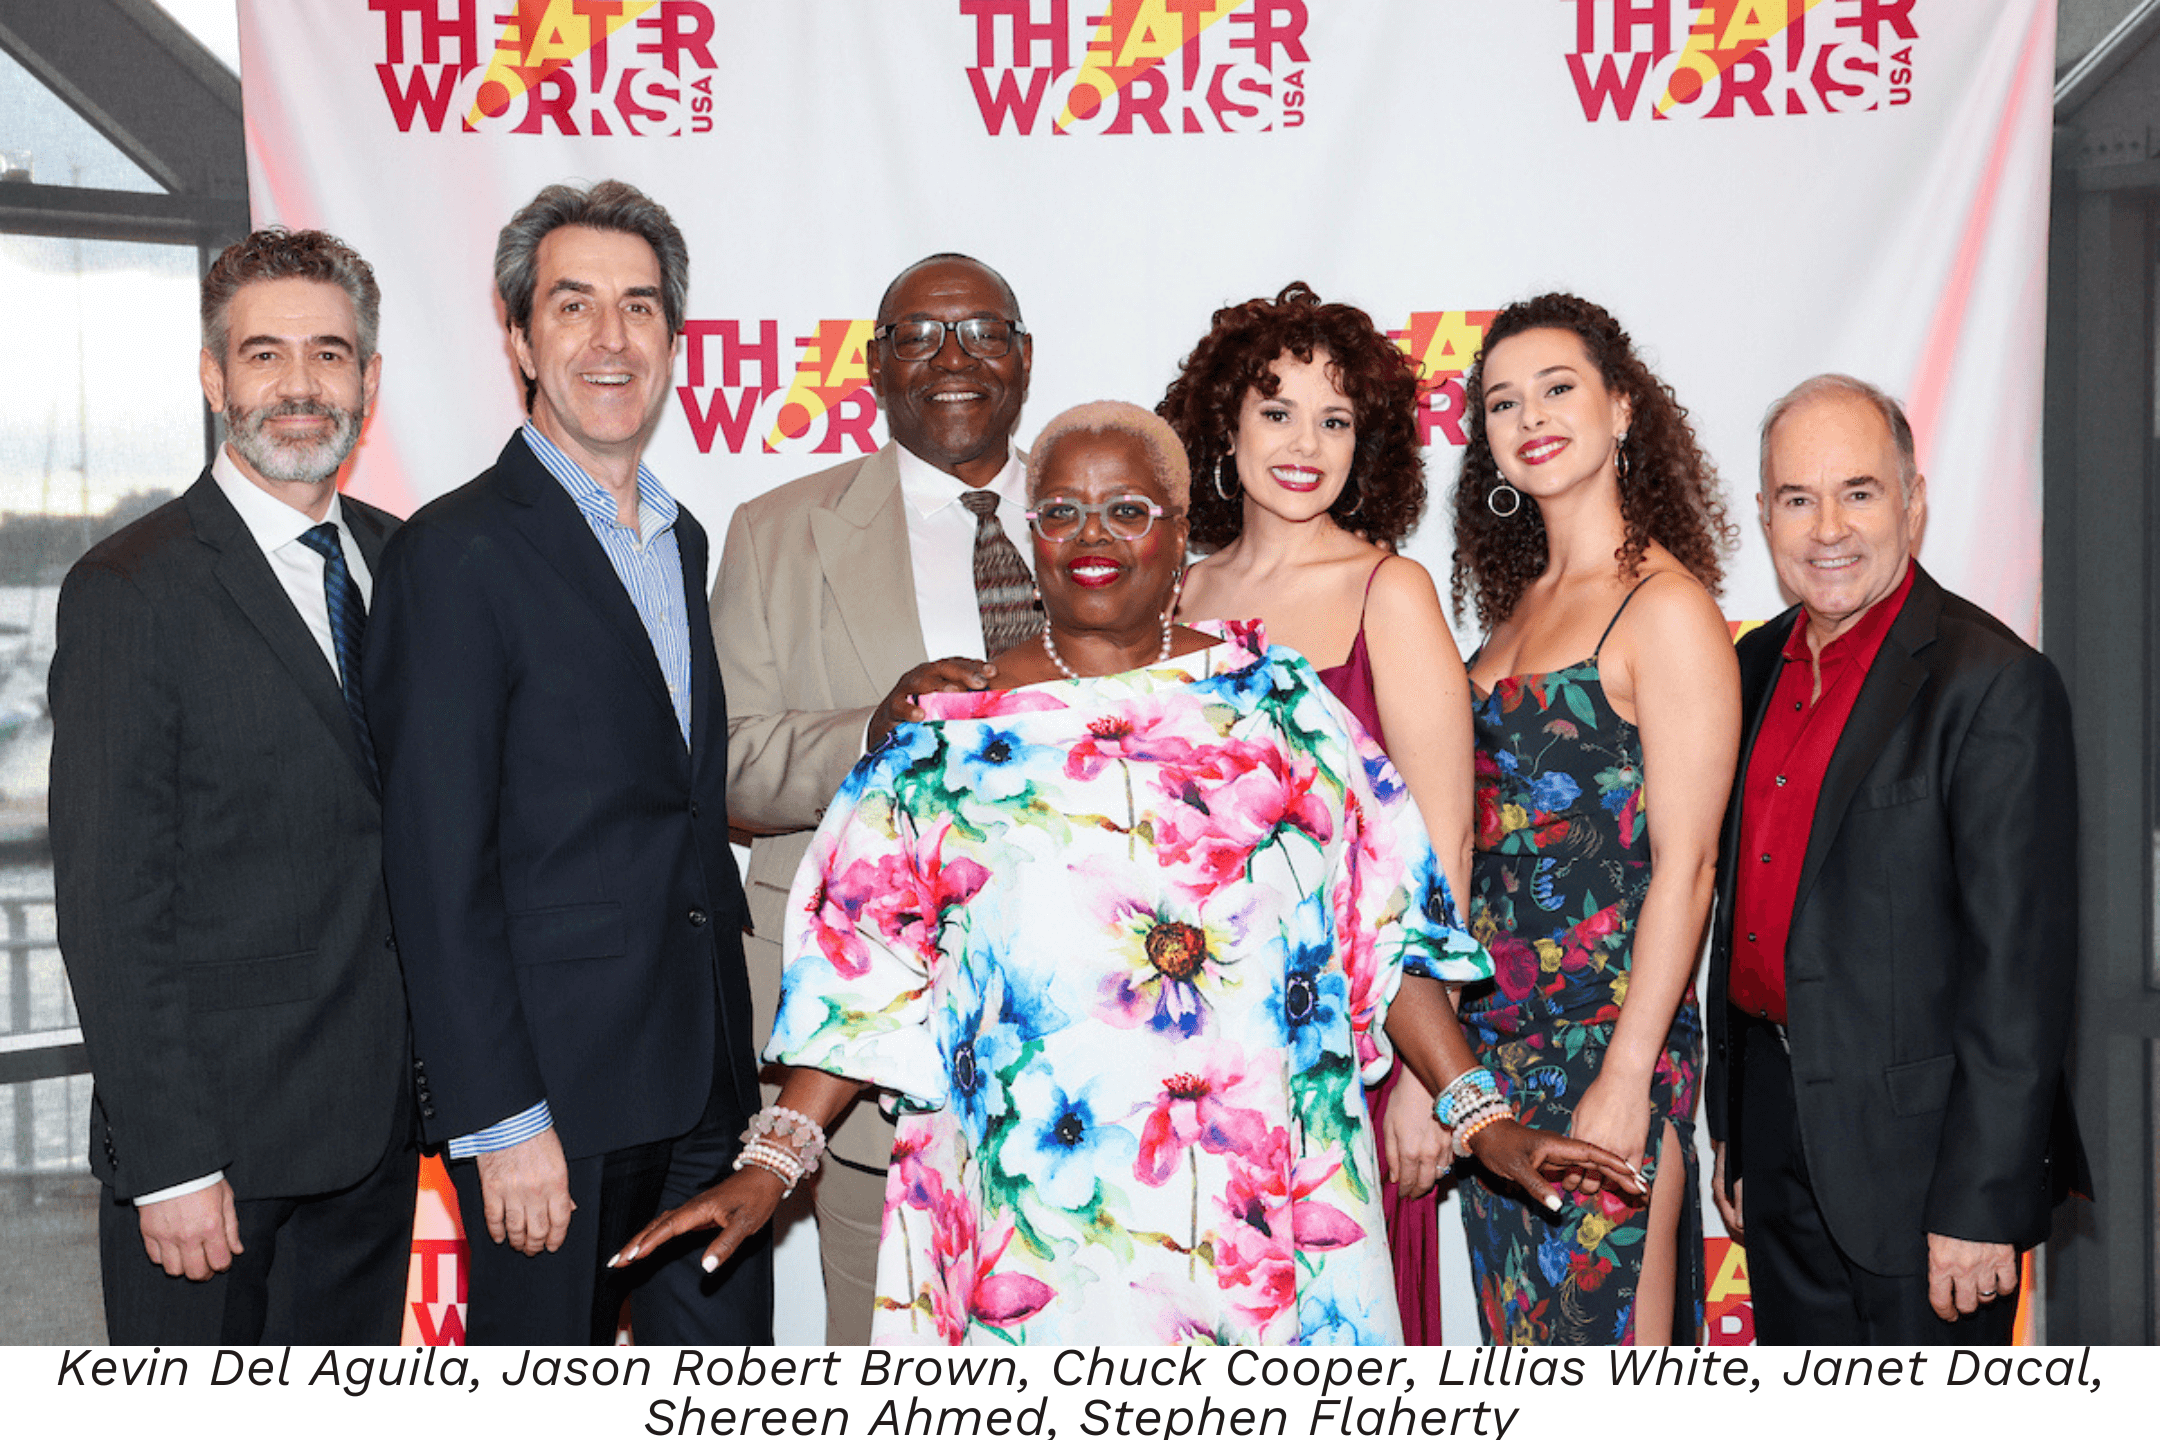 Kevin Del Aguila, Jason Robert Brown, Chuck Cooper, Lillias White, Janet Jacal, Shereen Ahmed, Stephen Flaherty